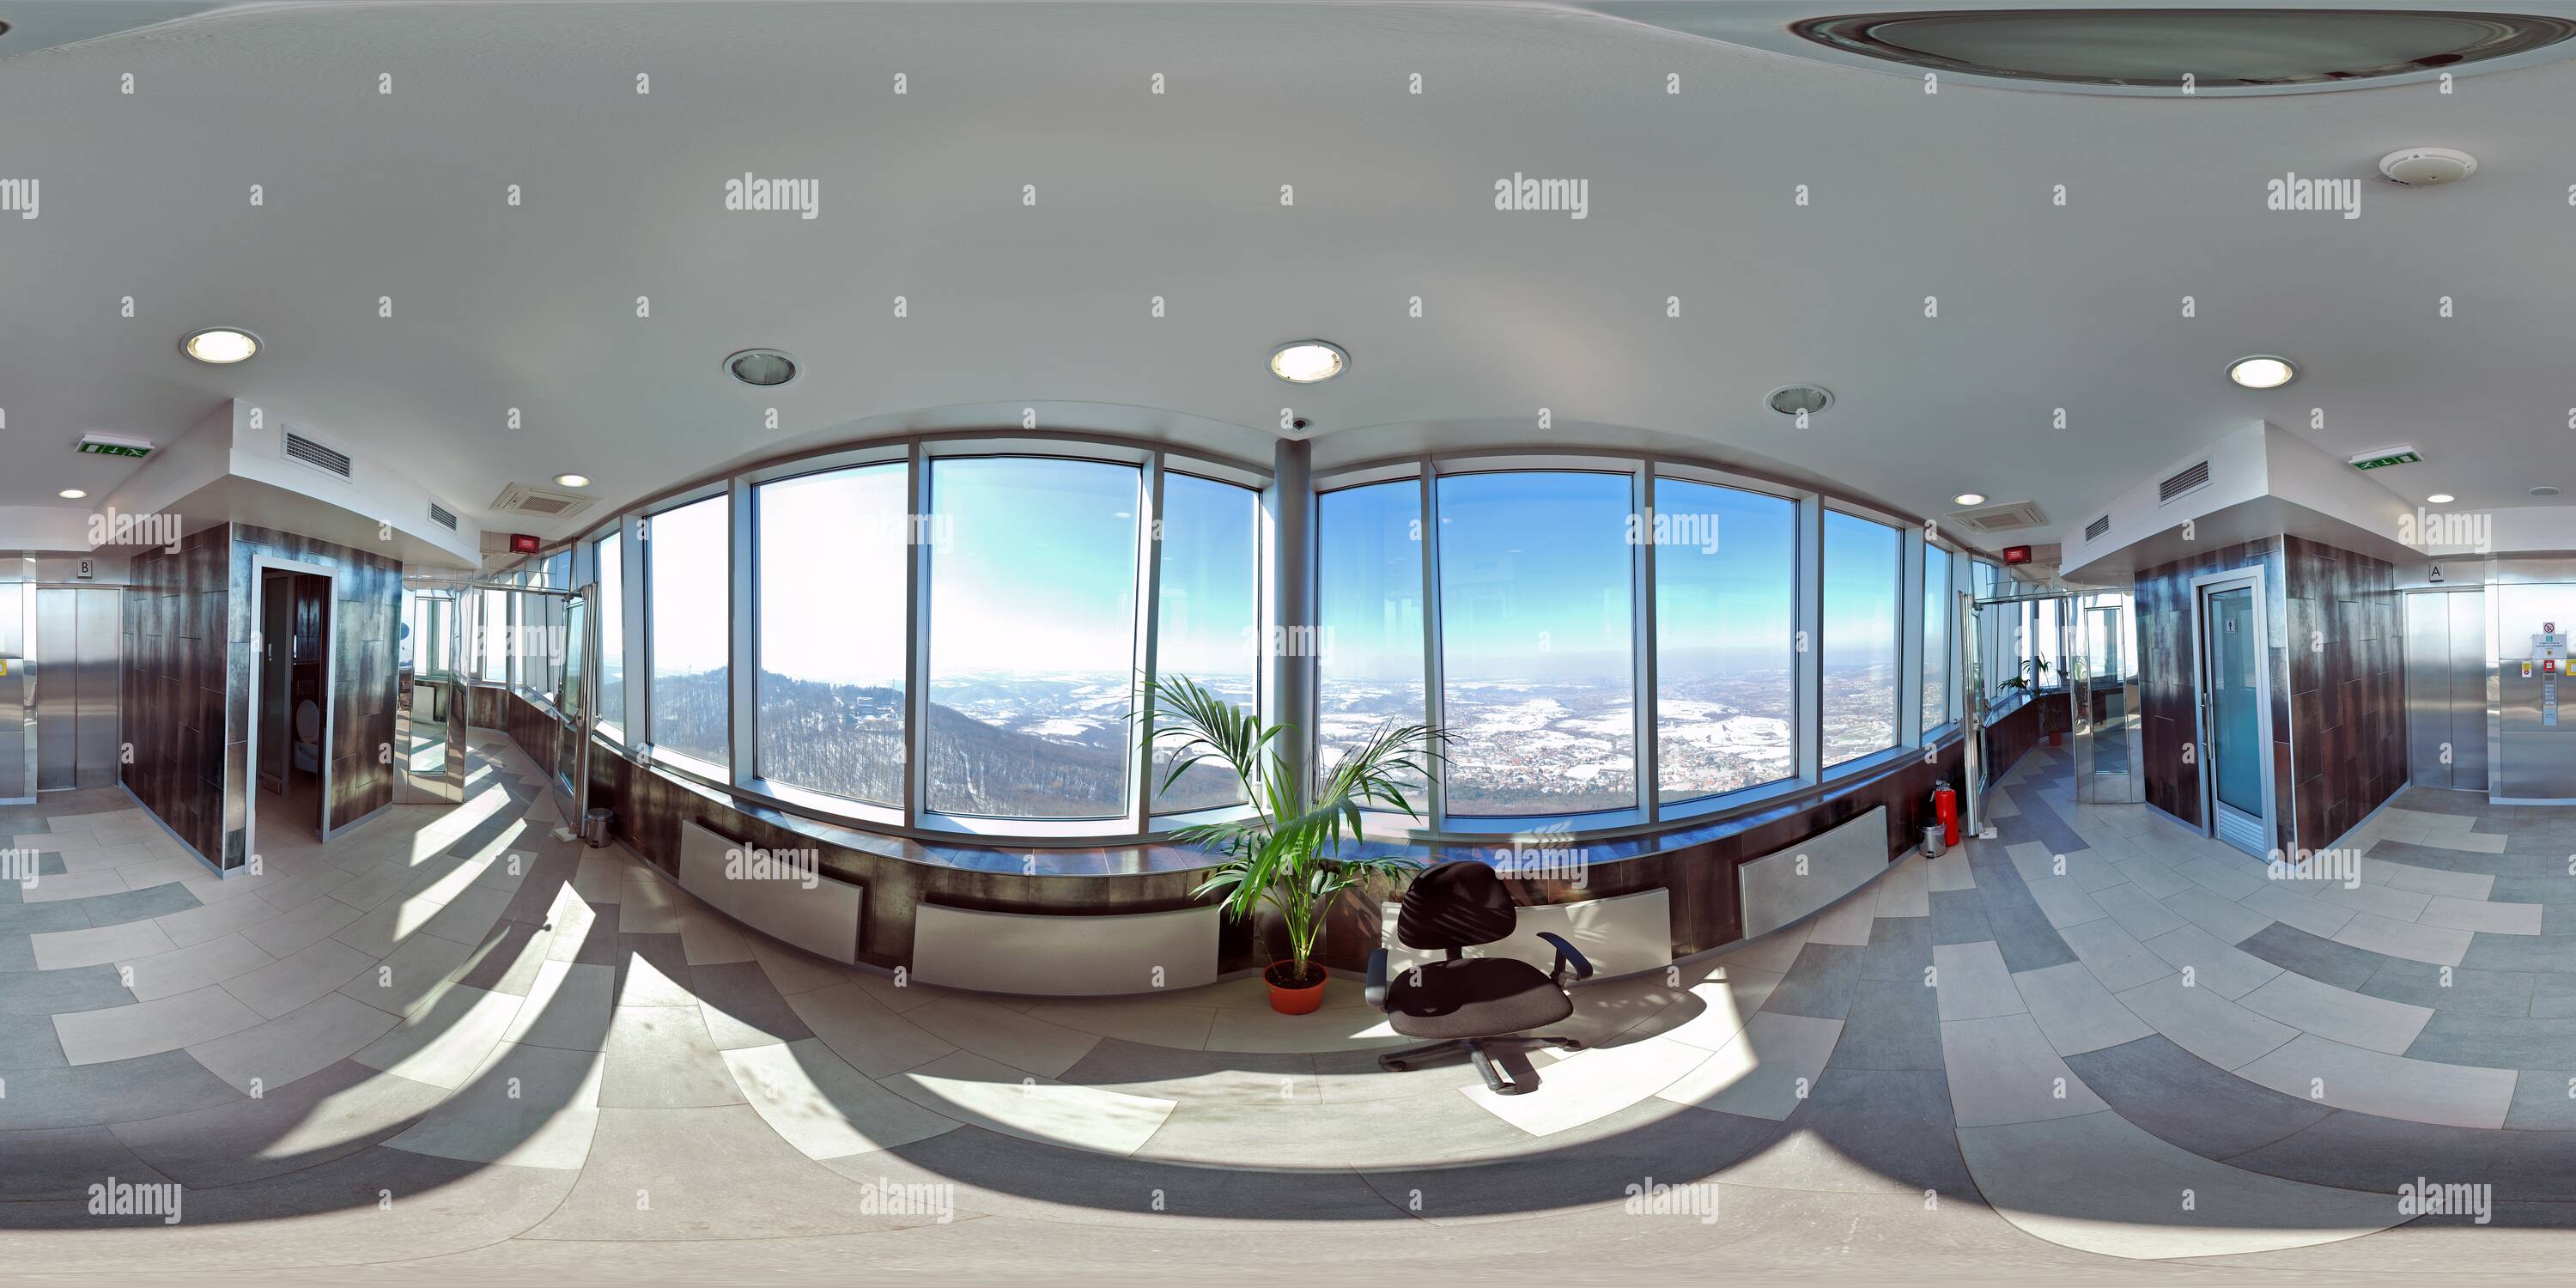 360 degree panoramic view of Inside Avala tower